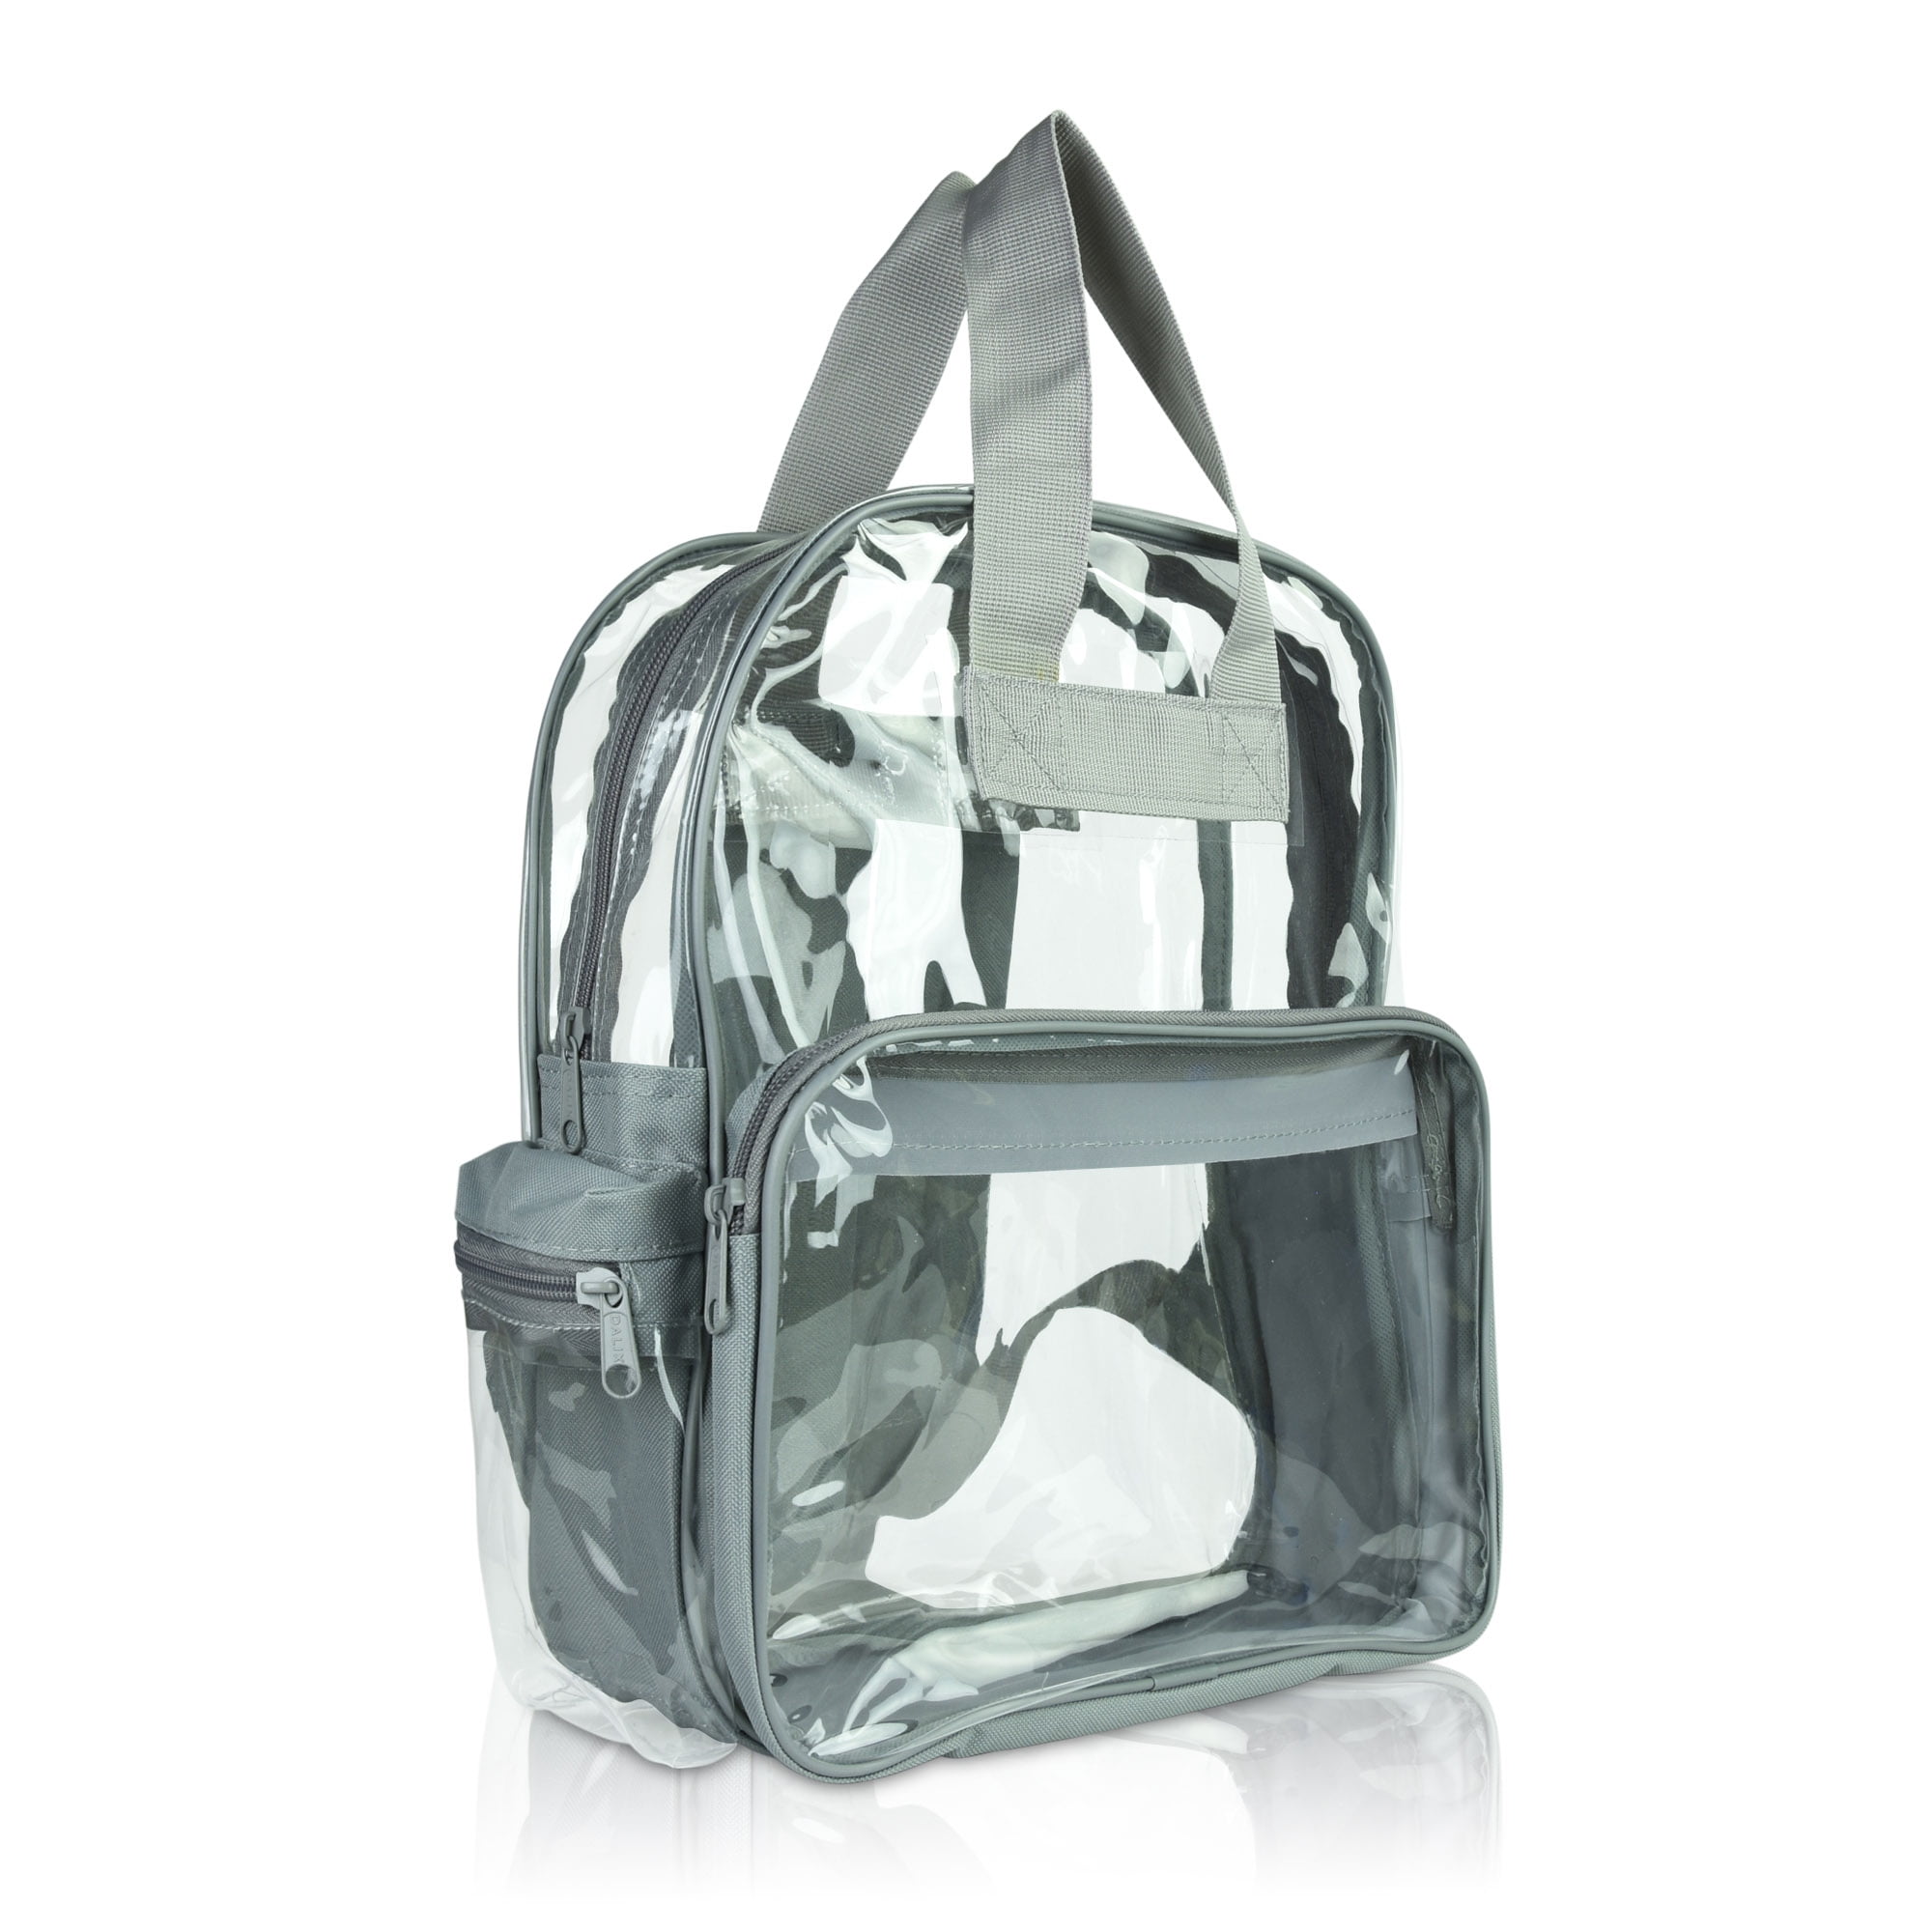 DALIX Small Clear Backpack Bag in Black 